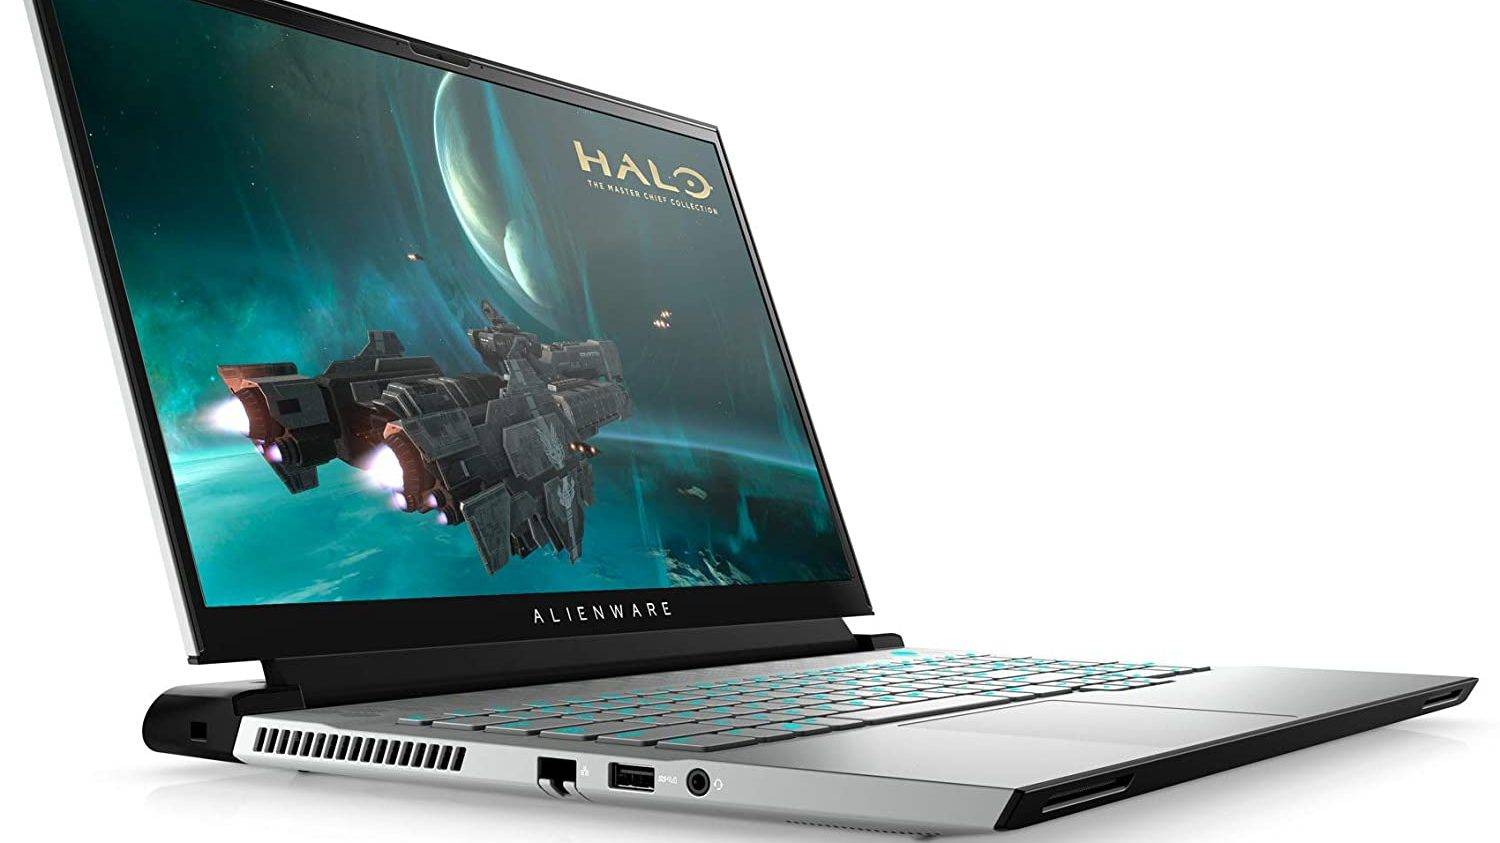 Avid gamers must take a look at out maybe the most up-to-date Amazon gaming laptops sale